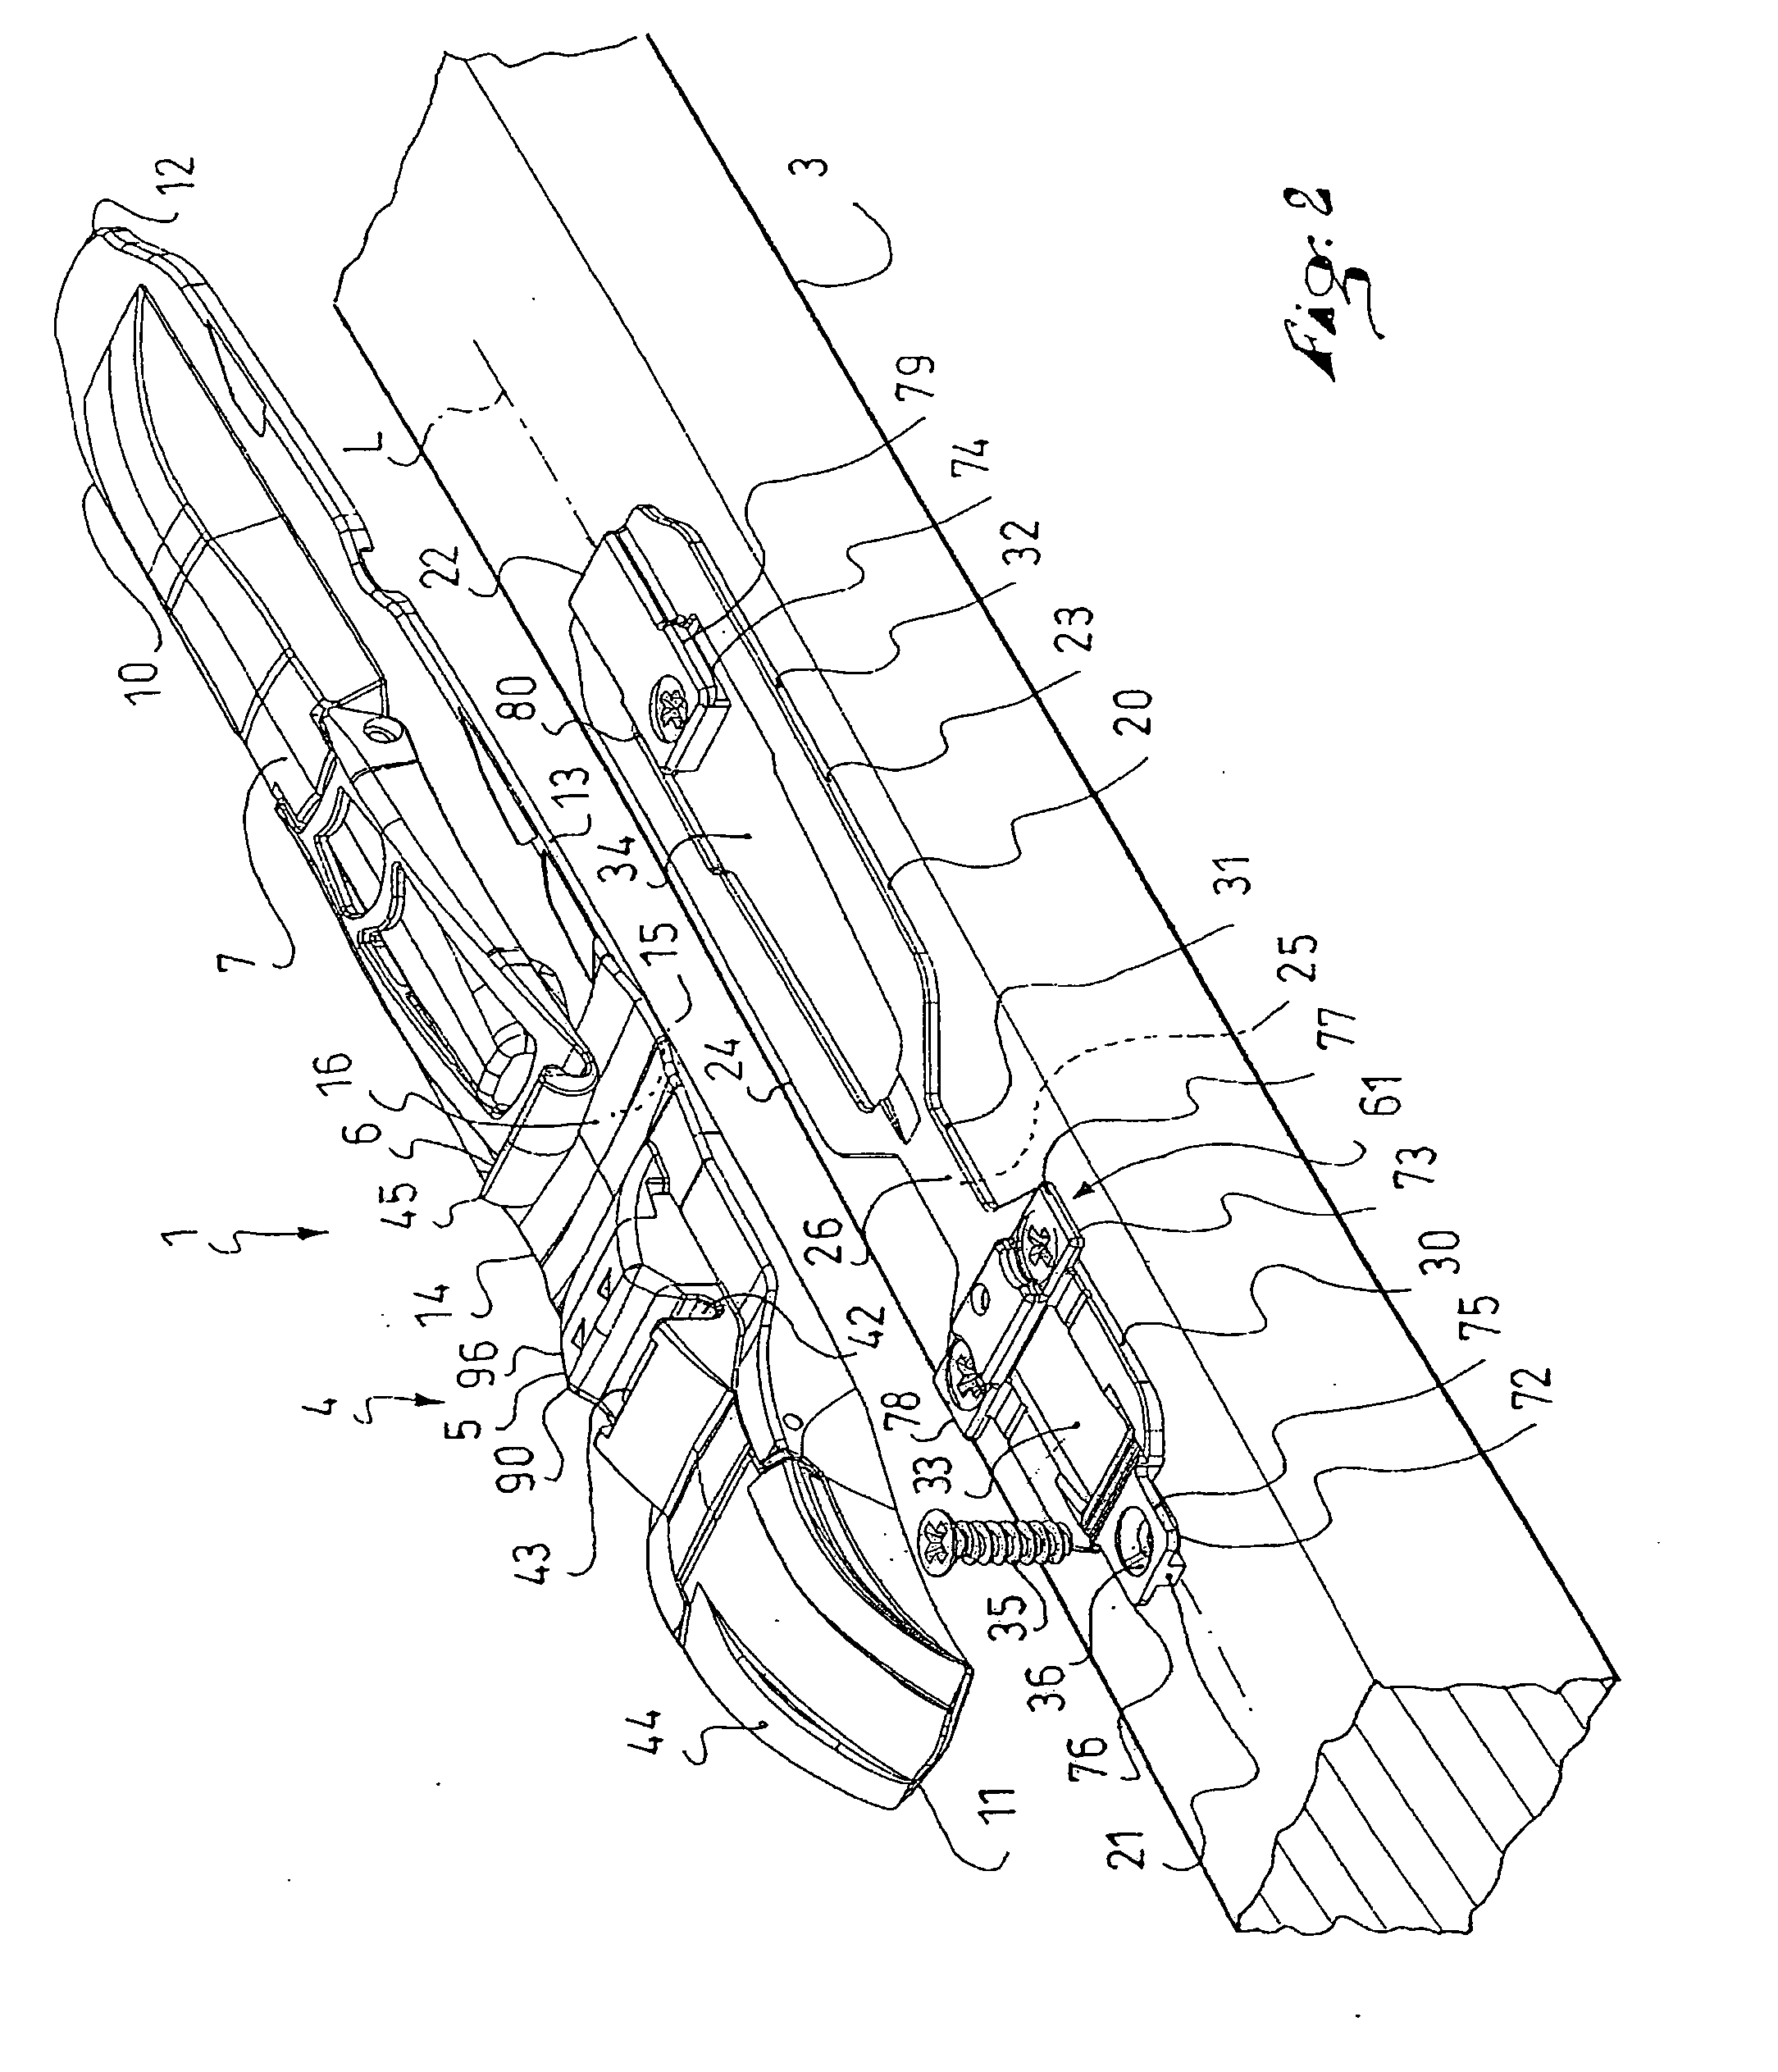 Assembly including a device for removably affixing a base to a plate